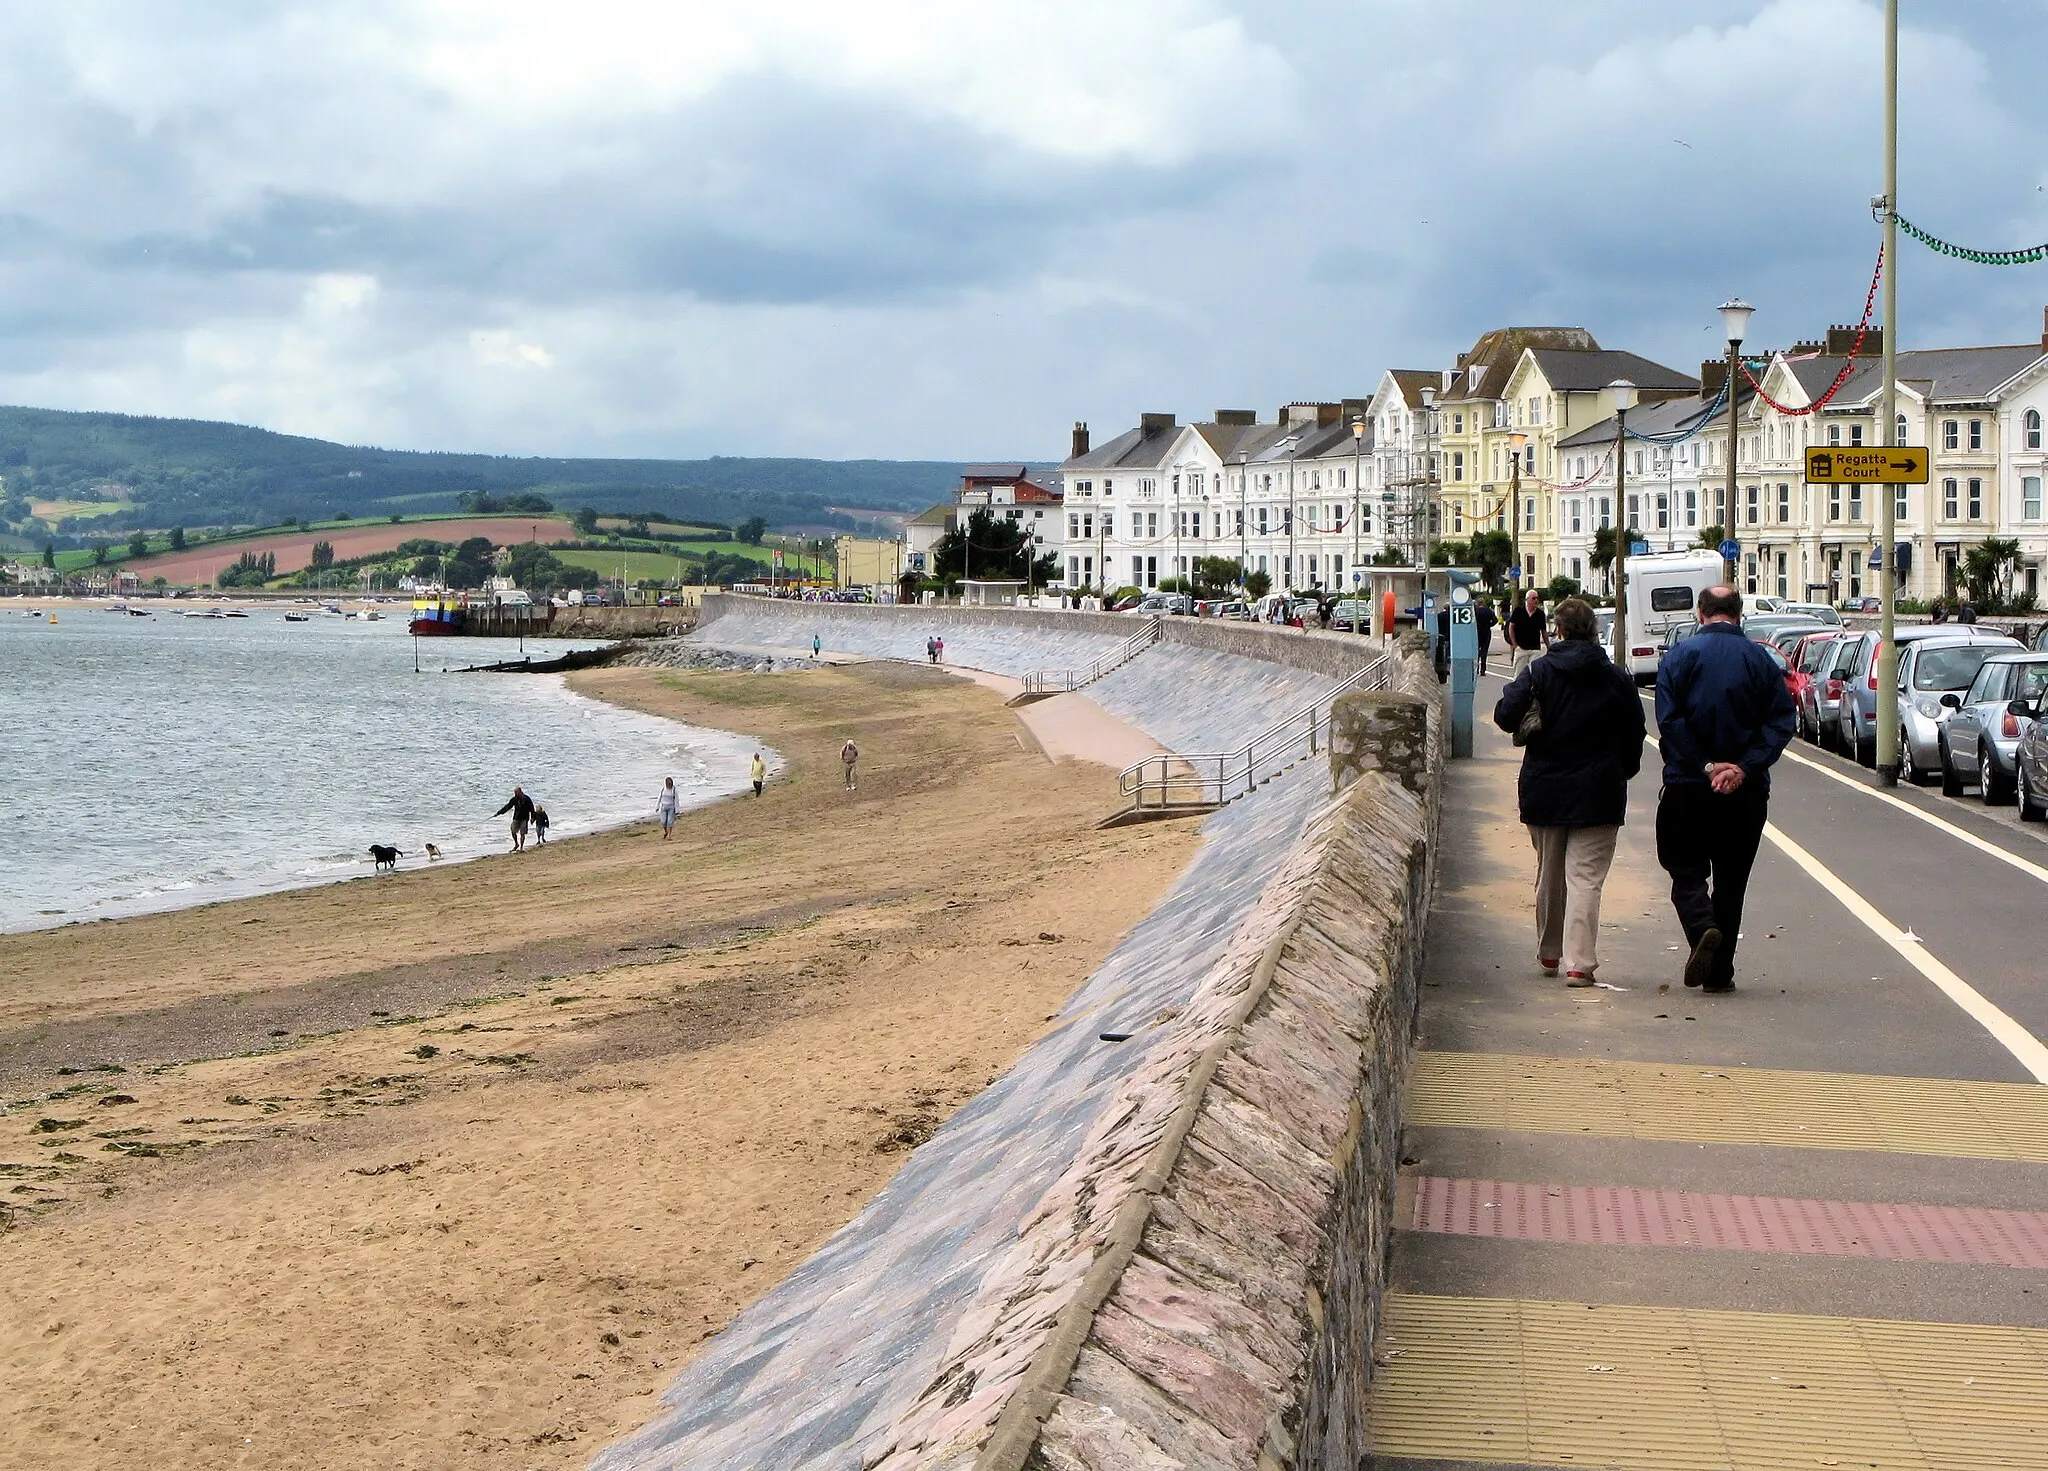 Photo showing: The sea front at Exmouth, South Devon, England, looking west. This town is the westward end of the Dorset and East Devon World Heritage Site, extending 95 miles (155km) to Swanage in Dorset. The Heritage Site is also called the Jurassic Coast, although Triassic, Jurassic and Cretaceous periods are represented.